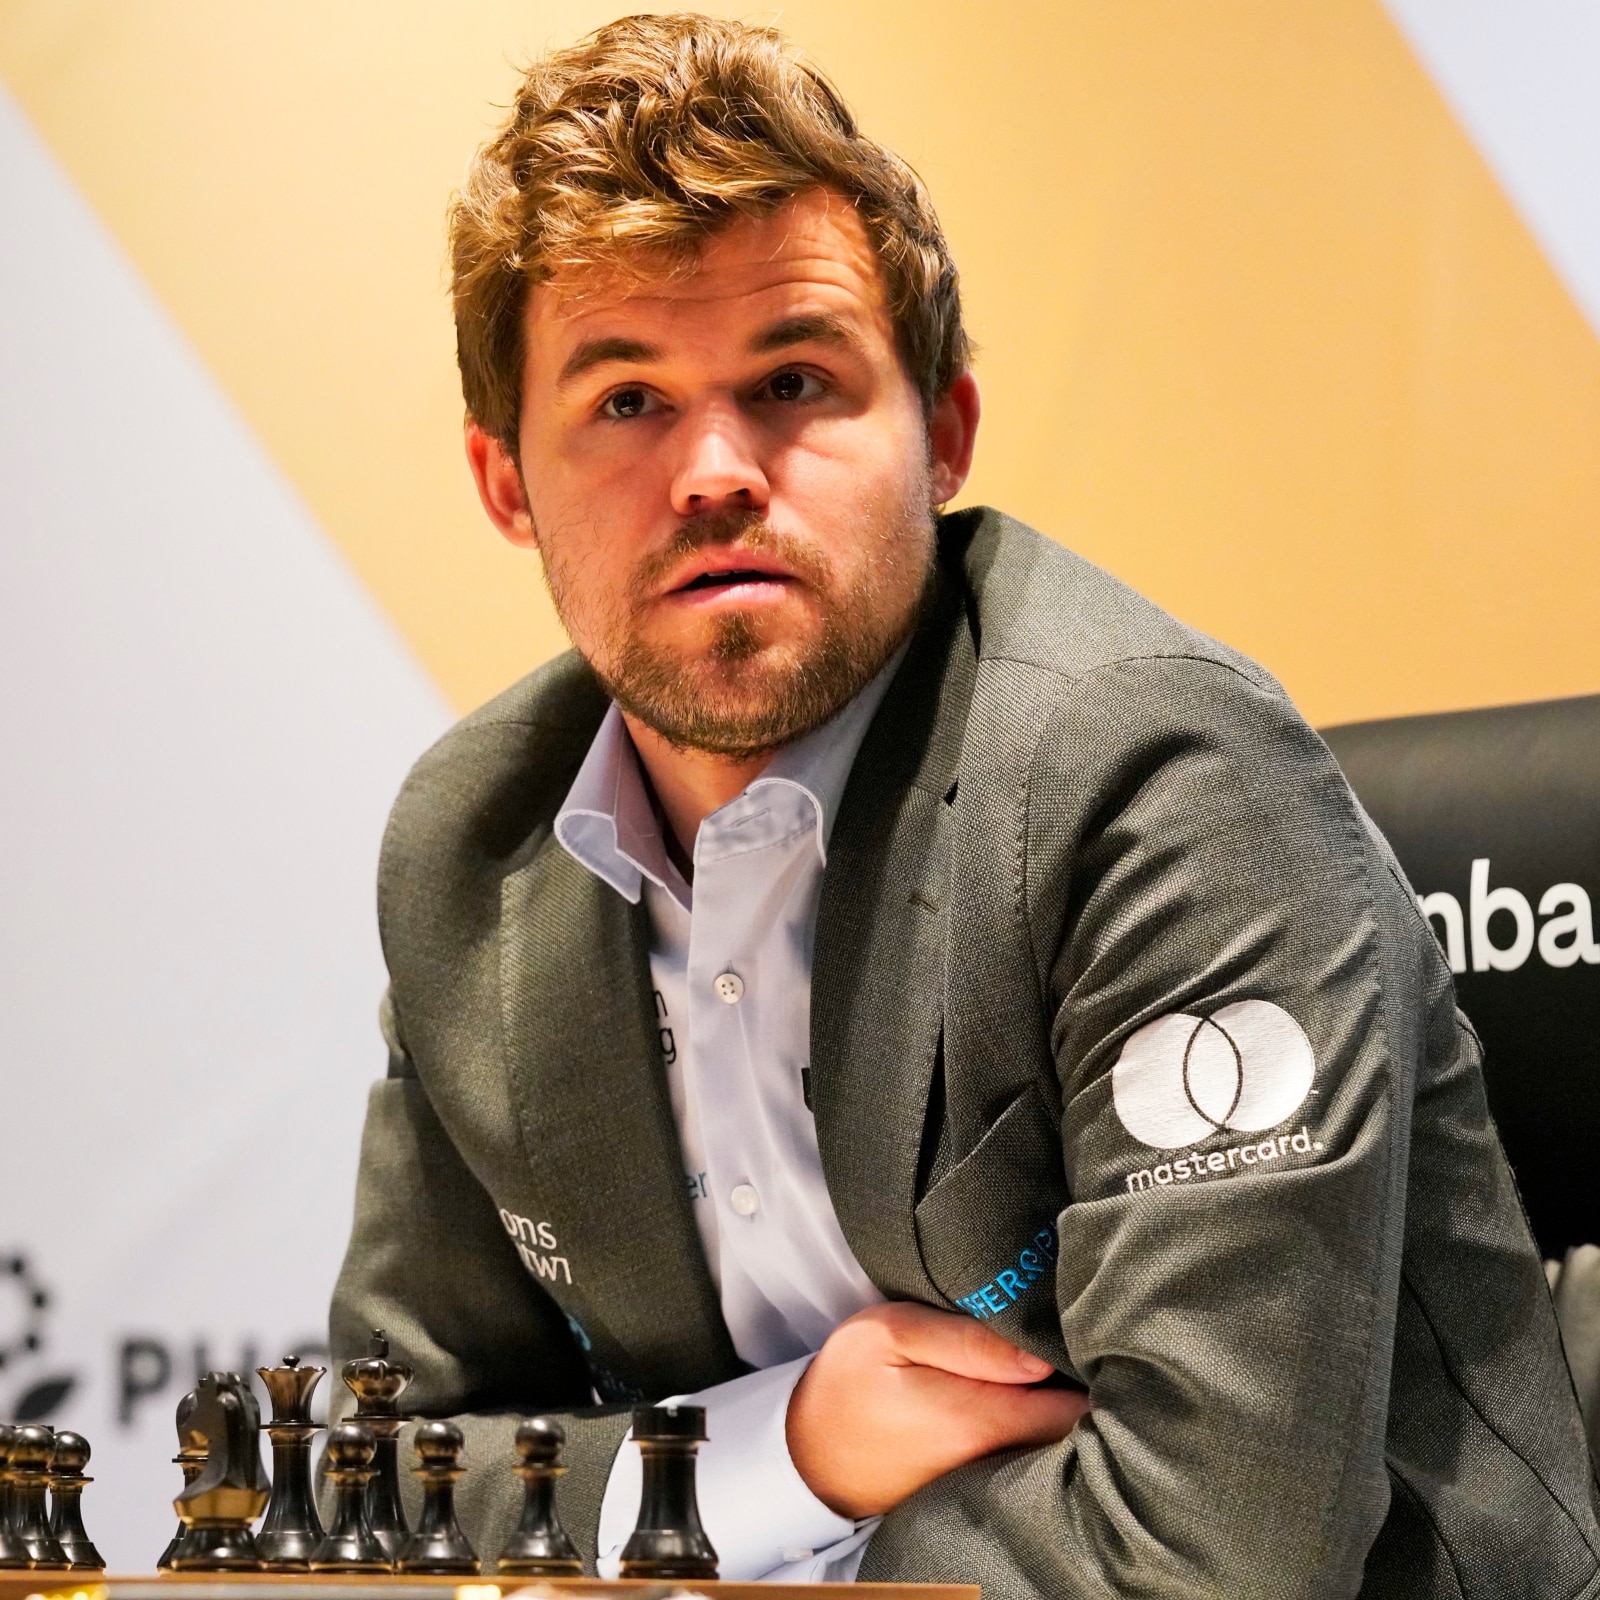 The Last Game: Magnus Retains His World Champion Title Ahead of